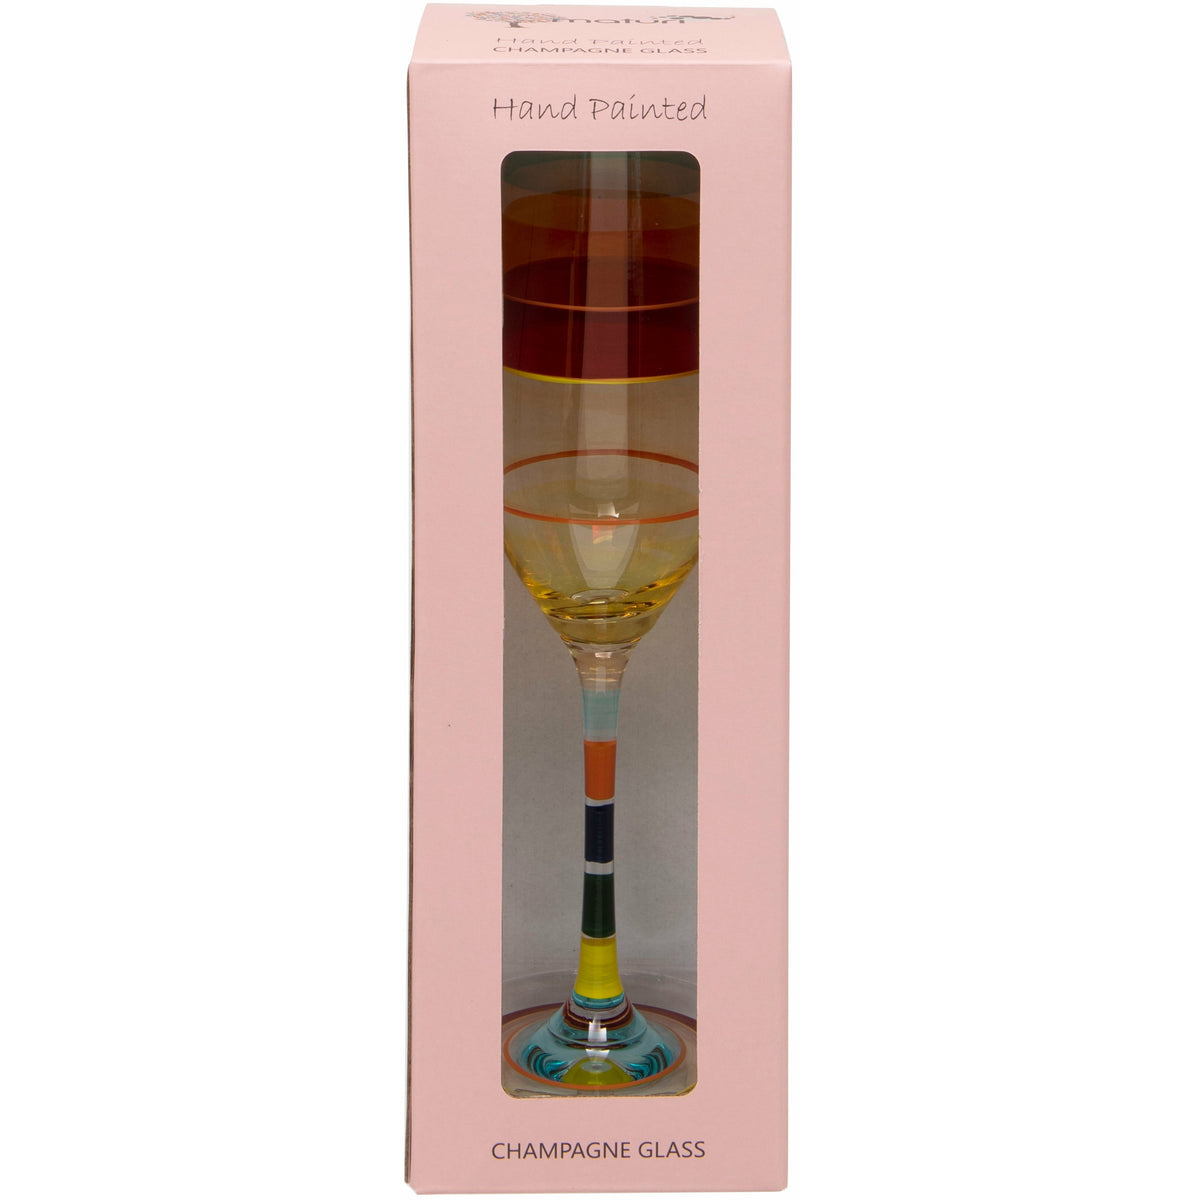 Hand Painted Light Stripe Champagne Flute in Box